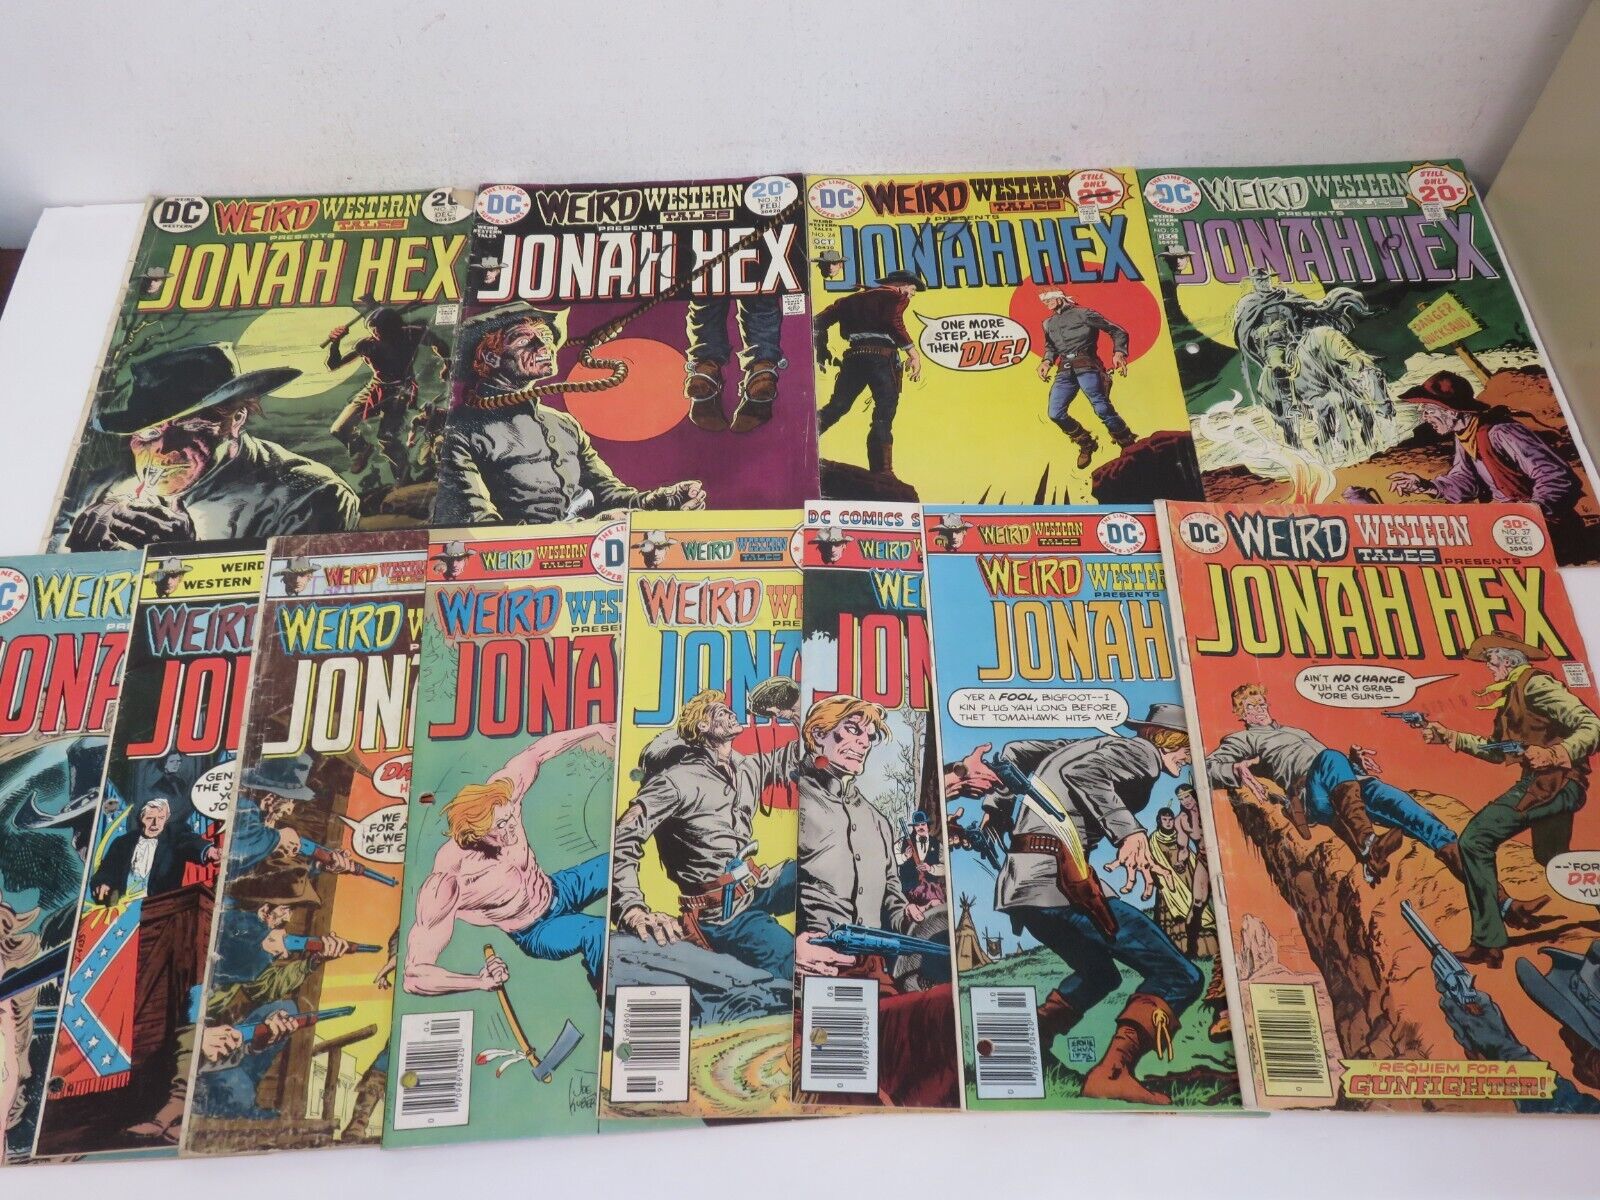 WEIRD WESTERN TALES JONAH HEX 20-37 DC COMICS 12 ISSUES LOT COLLECTION 1970s